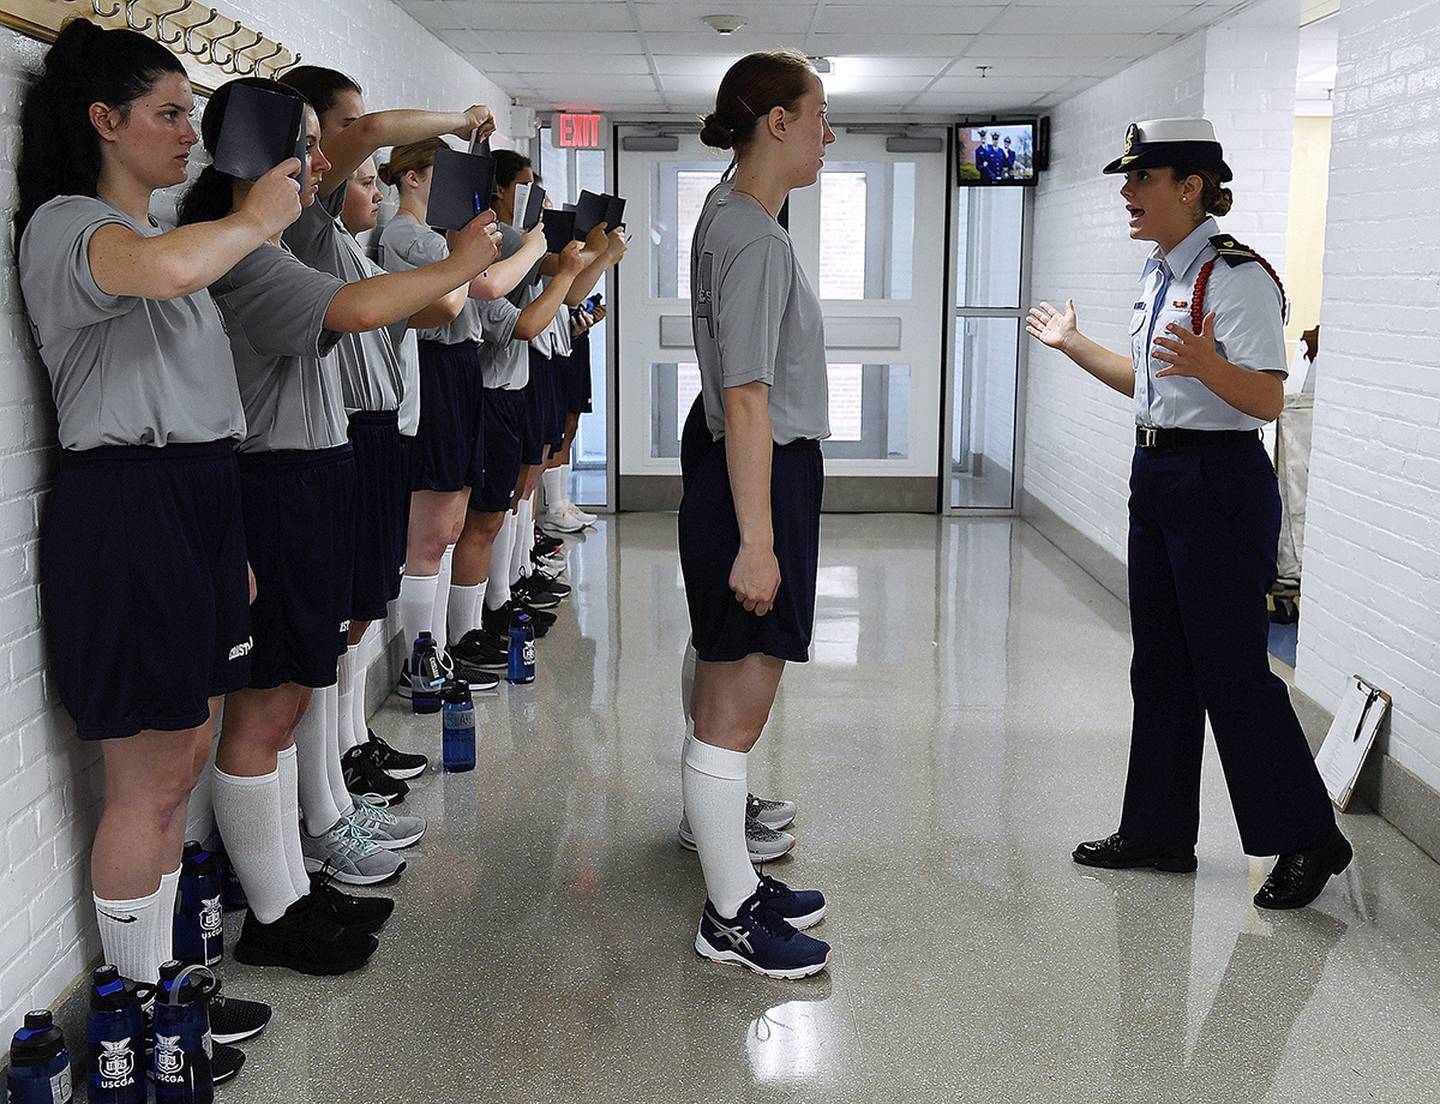 In this July 1, 2019, file photo, female swabs learn the positions of attention and parade rest while their male classmates get haircuts during the first day of a seven-week orientation for the Class of 2023 at the U.S. Coast Guard Academy in New London, Conn.